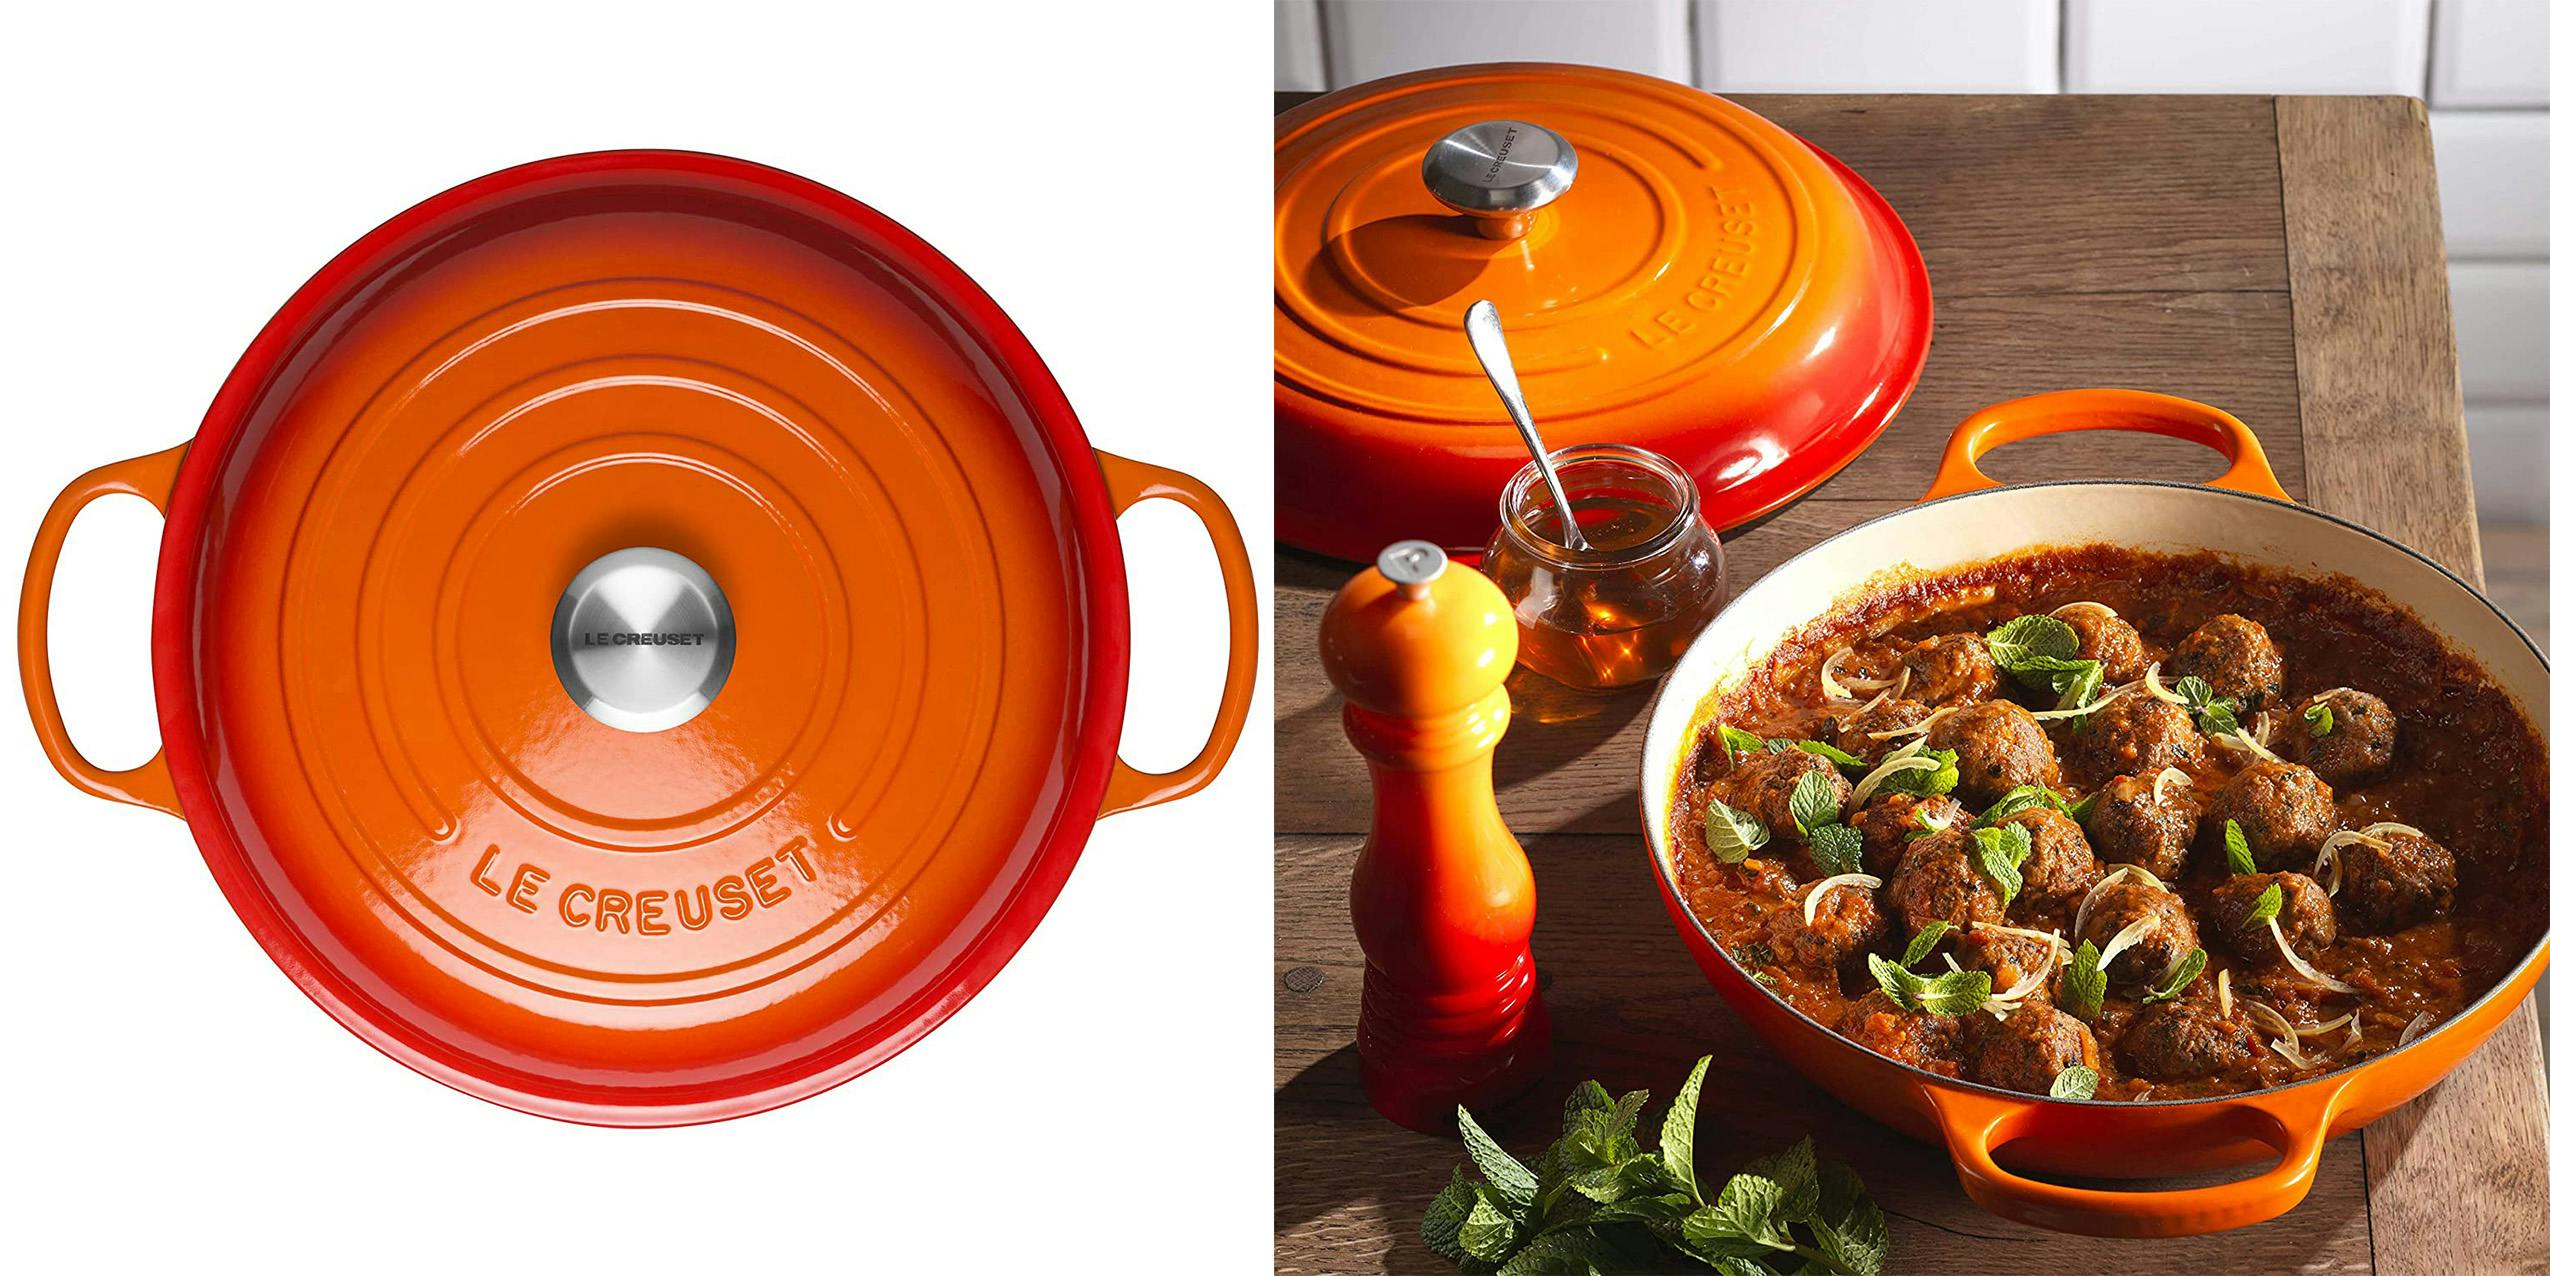 Le Creuset from above along with a lifestyle picture.